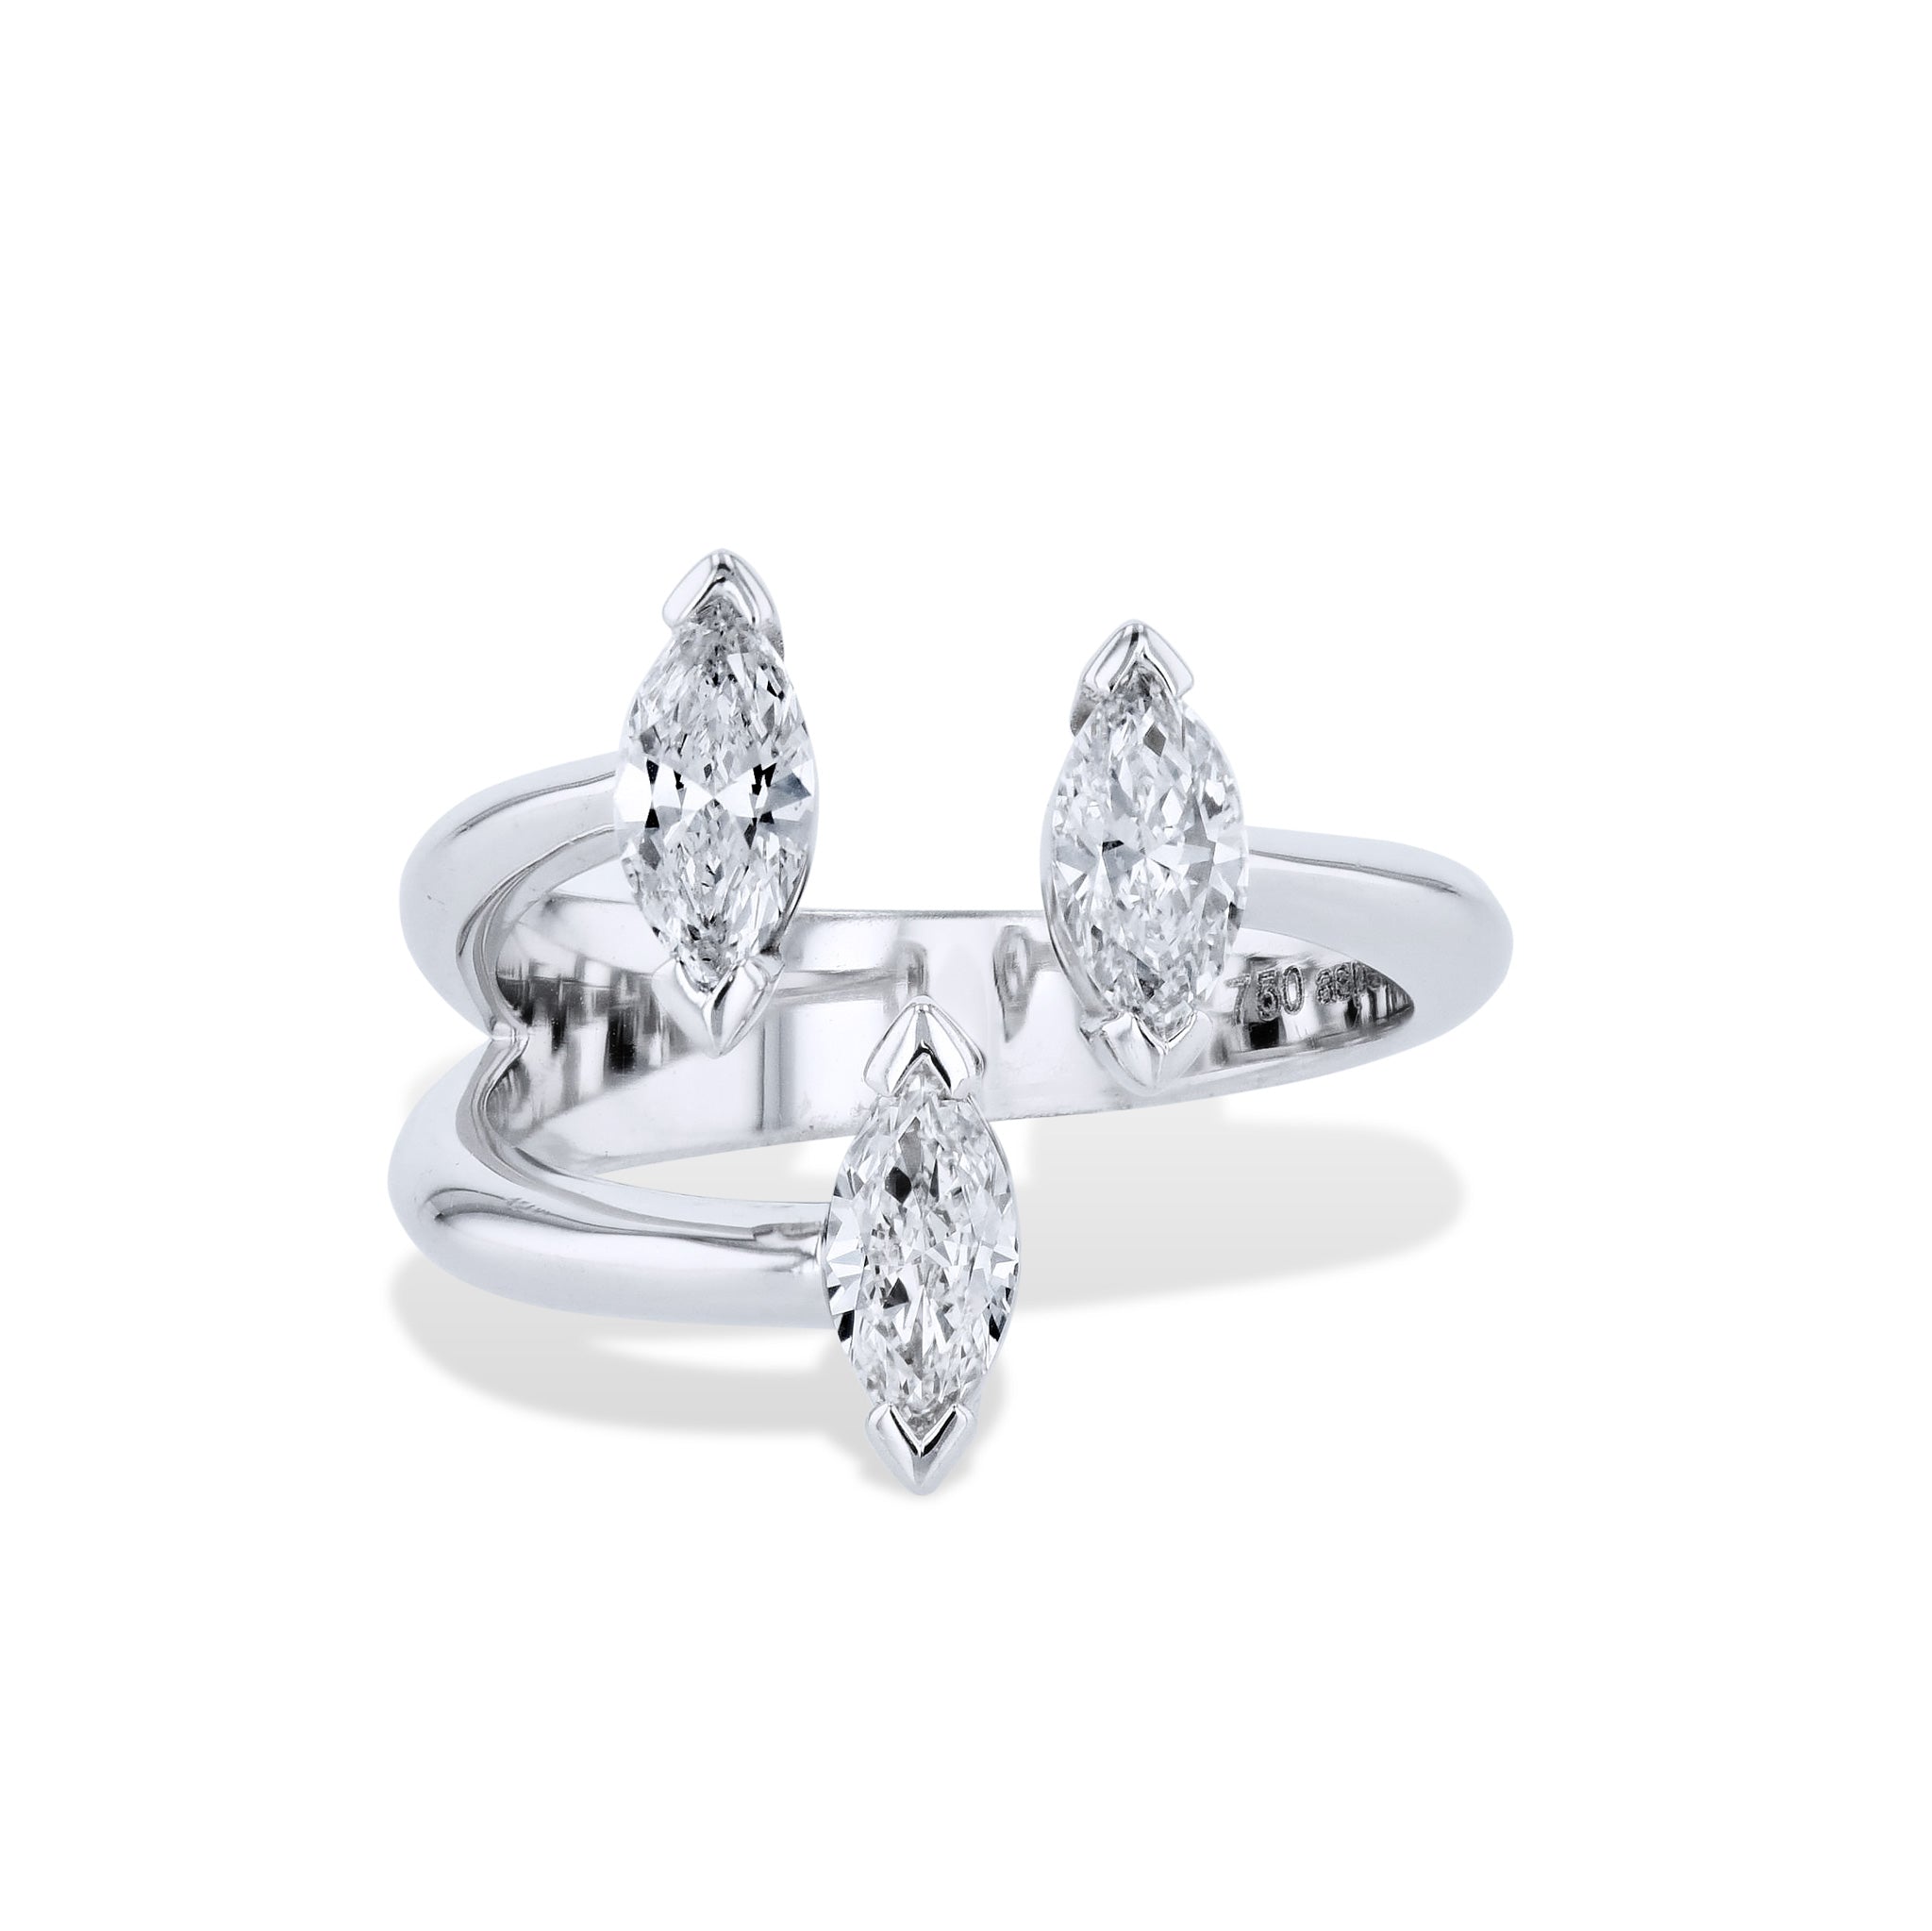 3 Marquise Diamond White Gold Ring Rings Curated by H